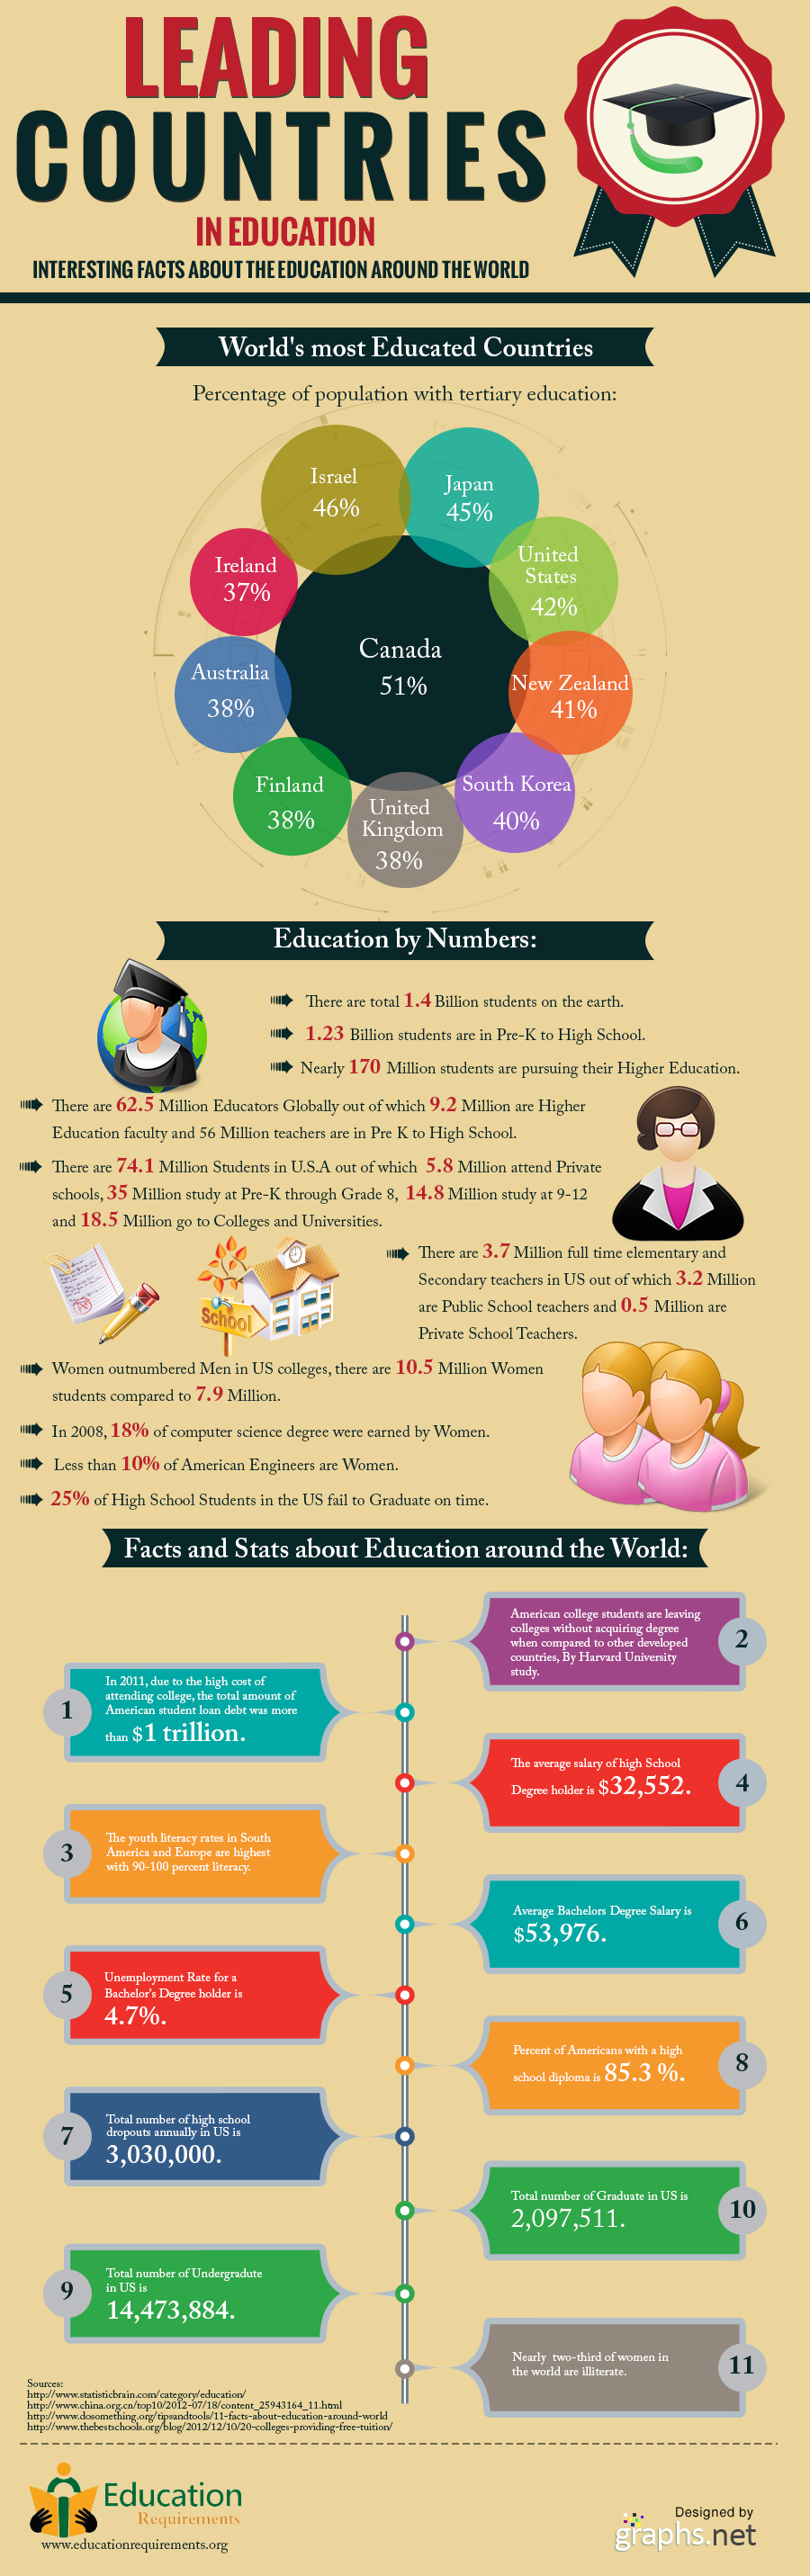 10 Top Countries that Leads the World in Education